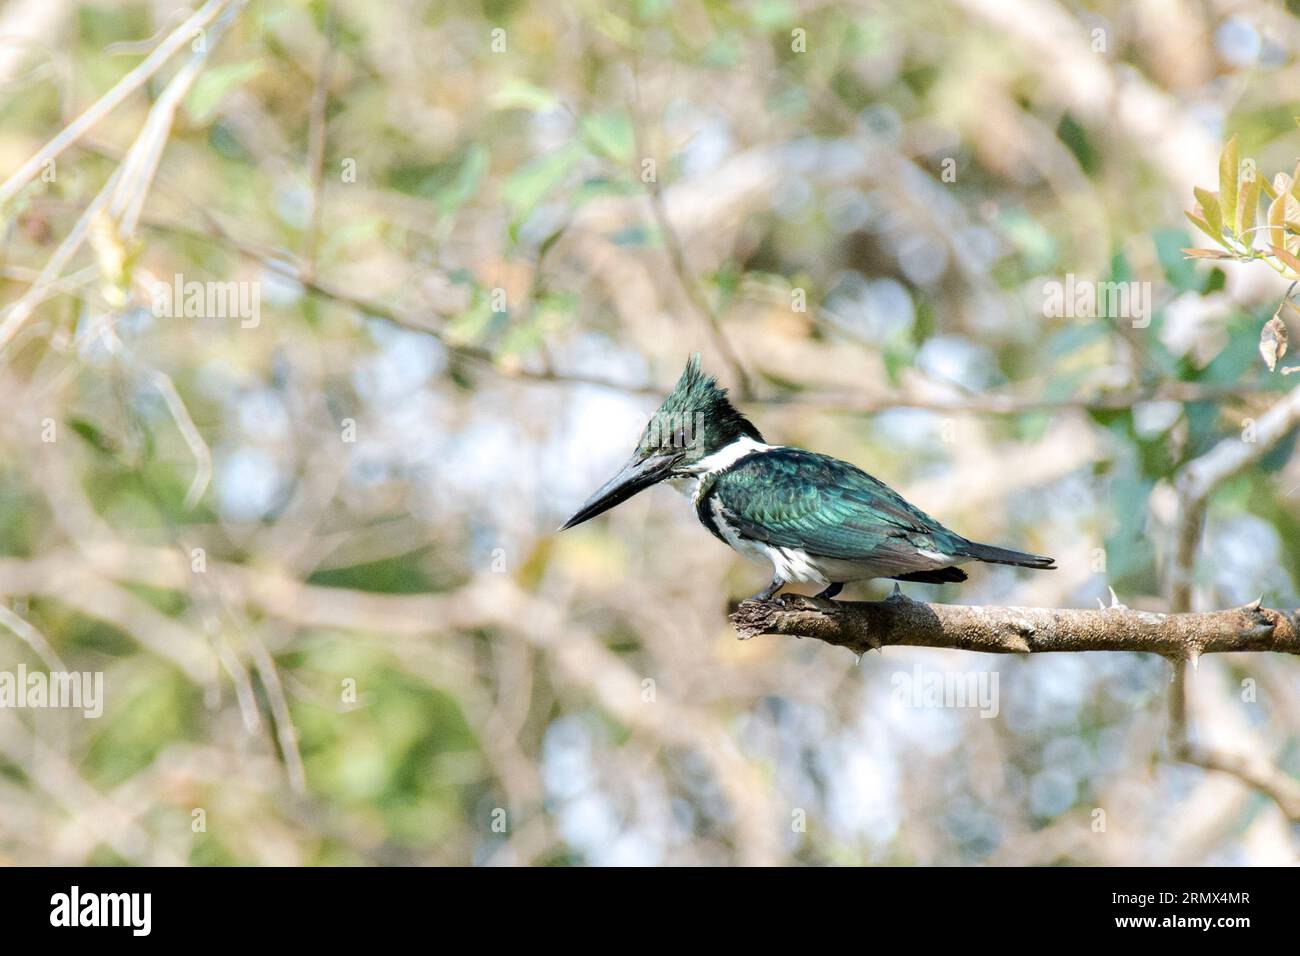 Ringed Kingfisher, Megaceryle torquata, perched on a branch in the Pantanal, Mato Grosso, Brazil, South America Stock Photo